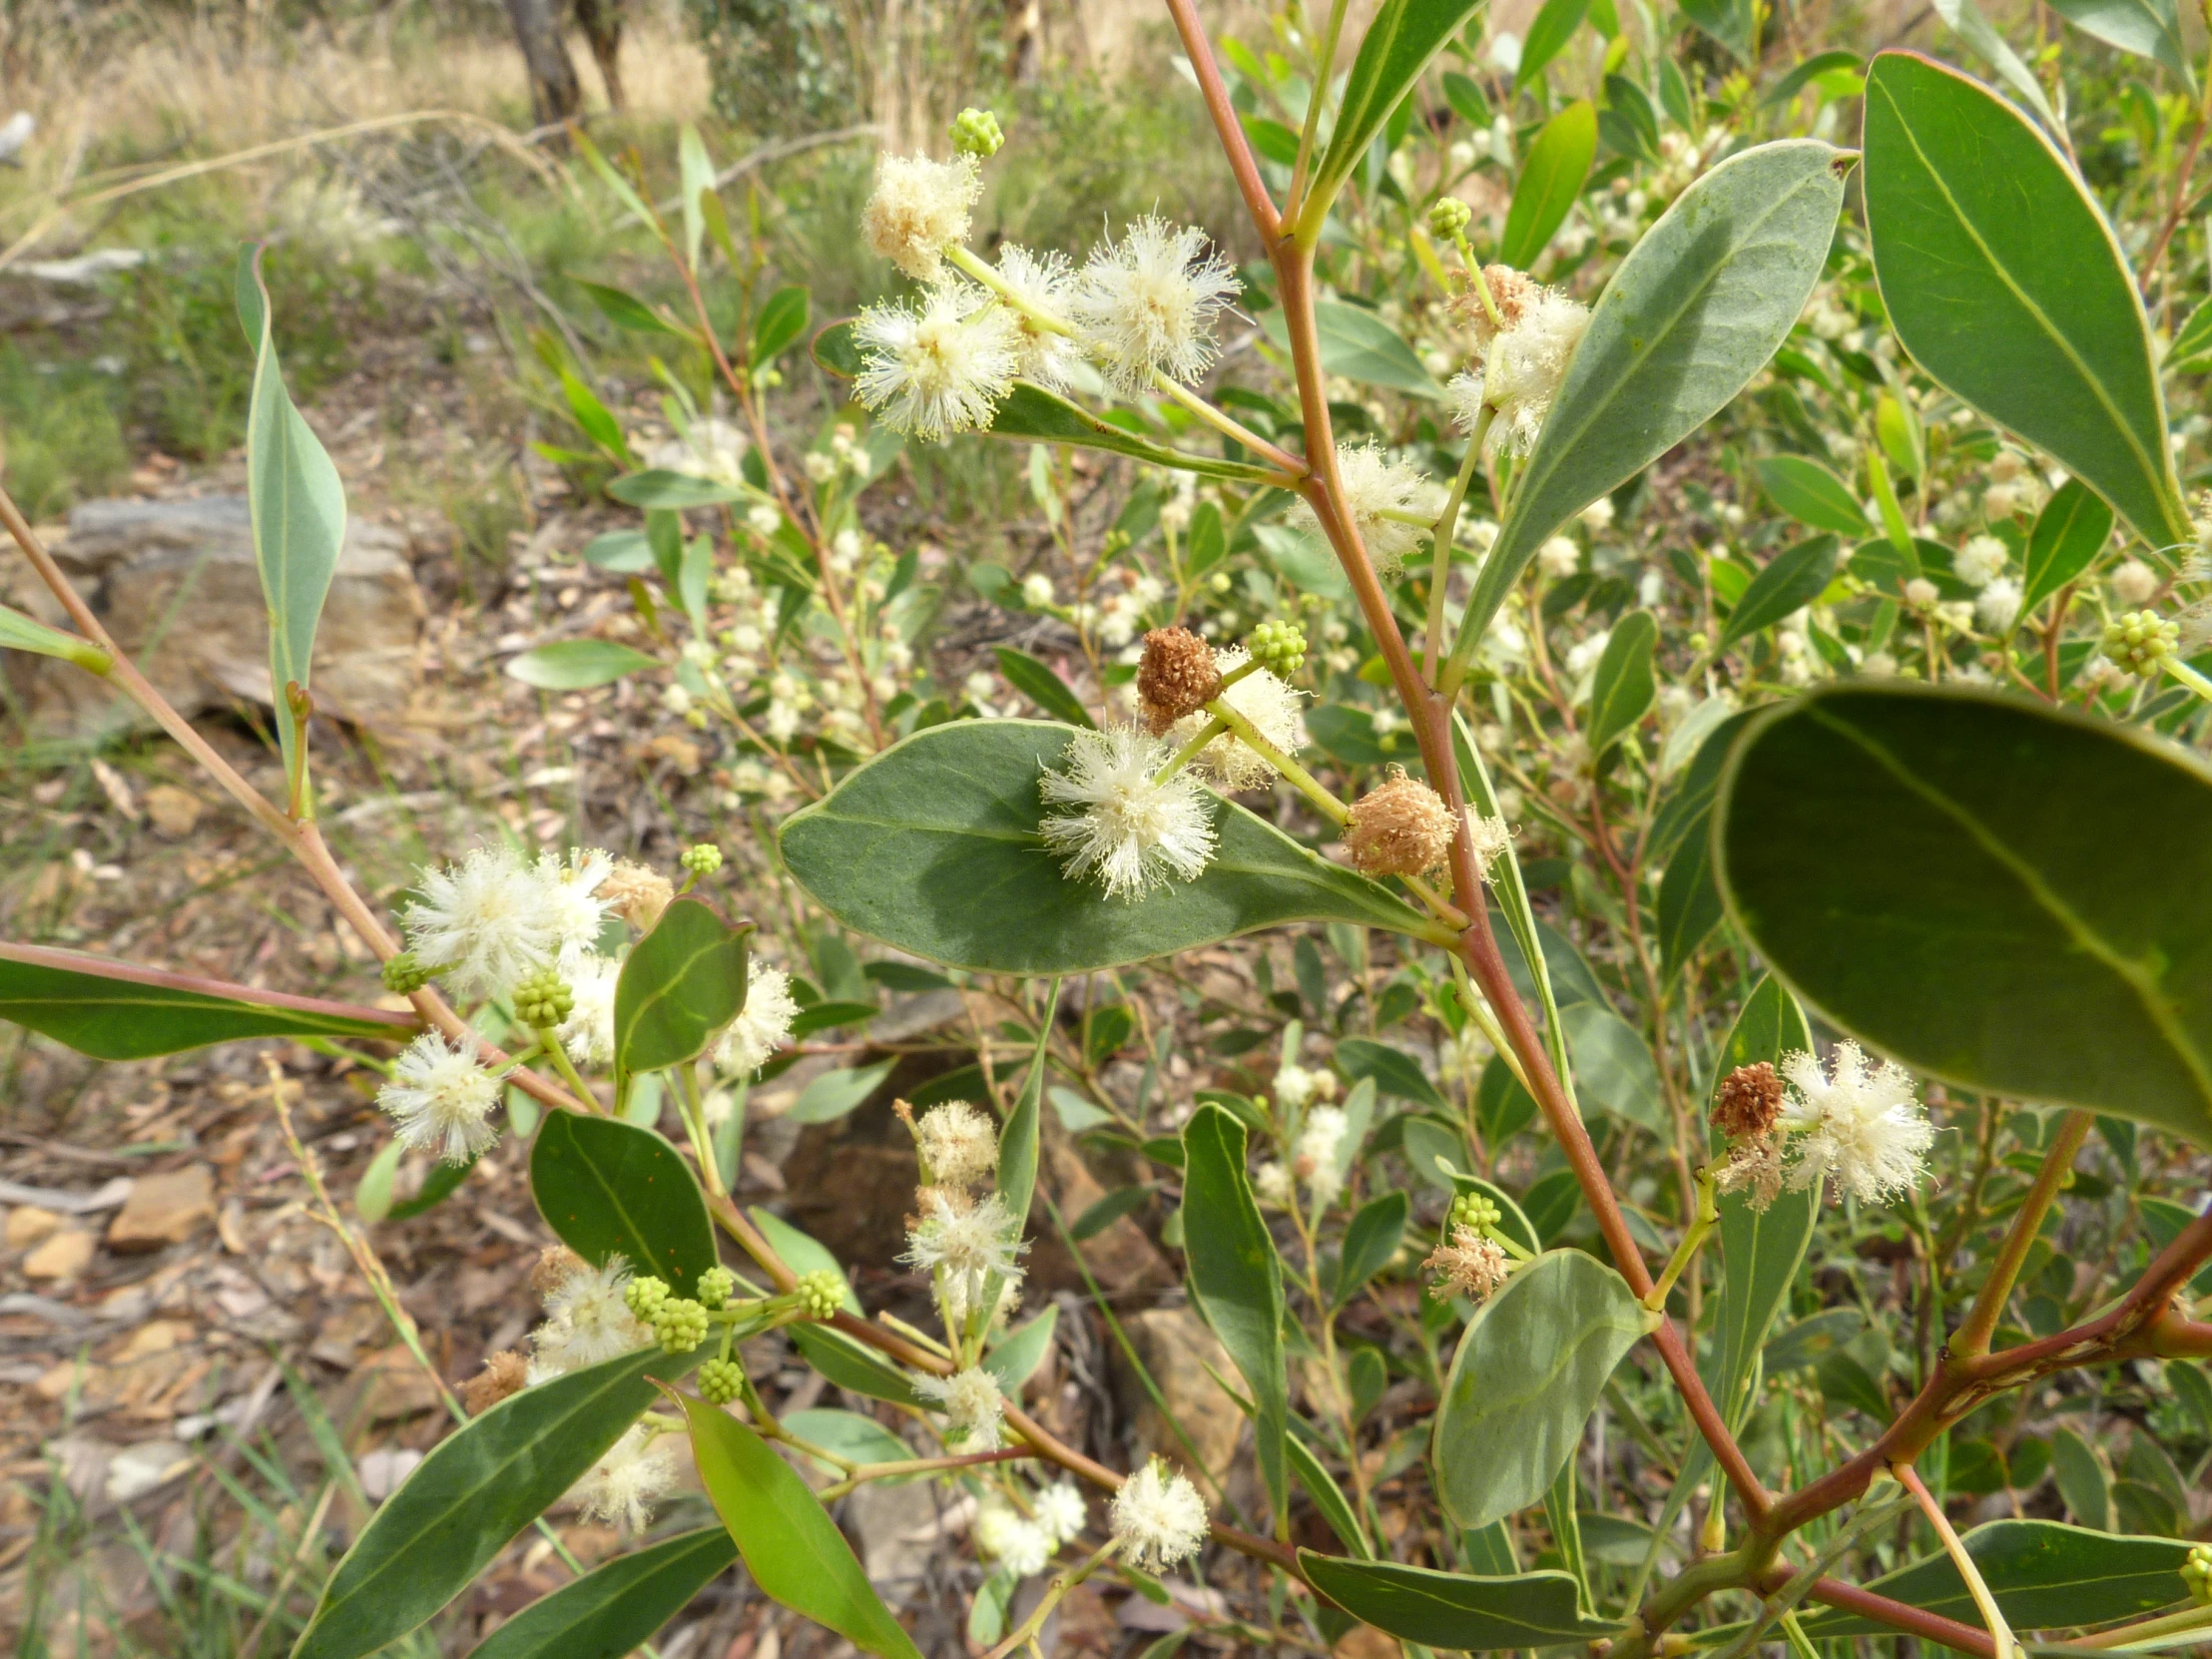 a small plant with white flowers in the foreground